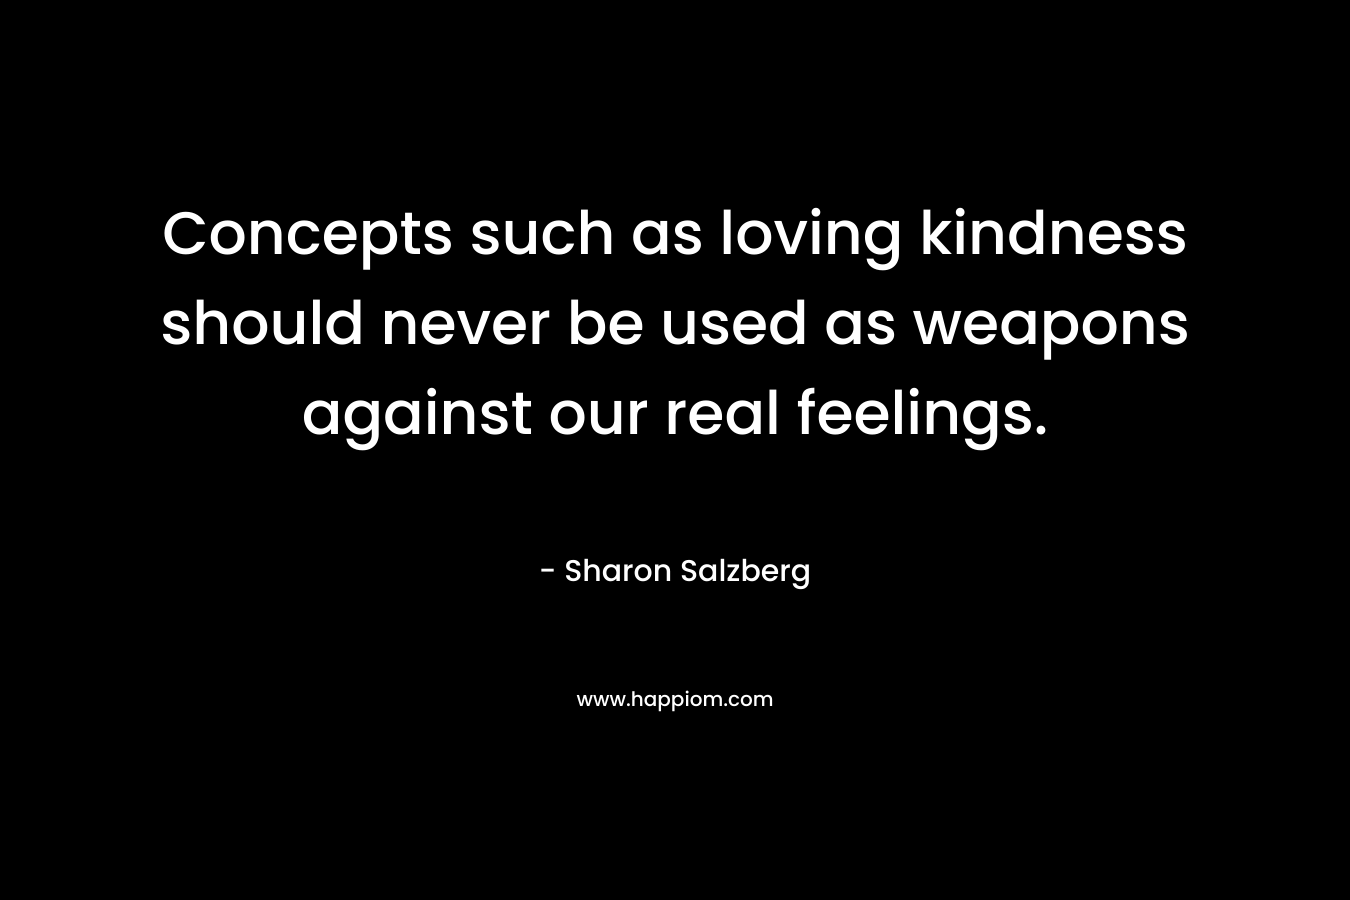 Concepts such as loving kindness should never be used as weapons against our real feelings.